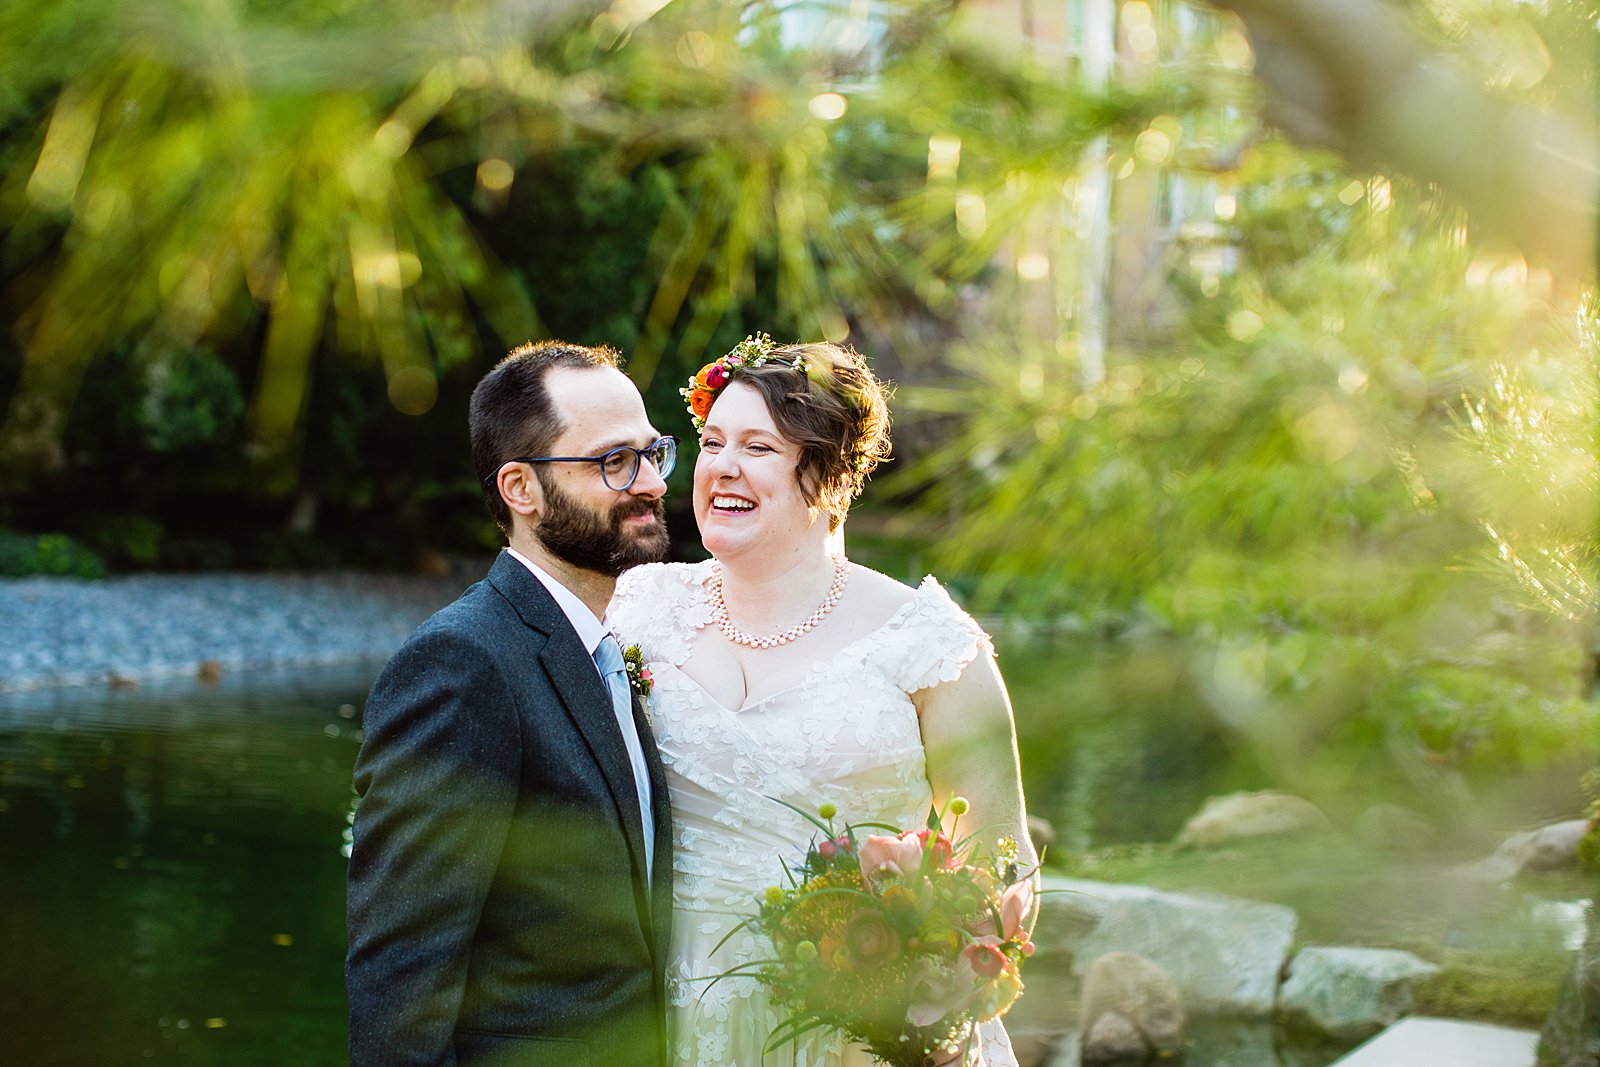 Bride and Groom laughing together during their Japanese Friendship Garden wedding by Phoenix wedding photographer PMA Photography.